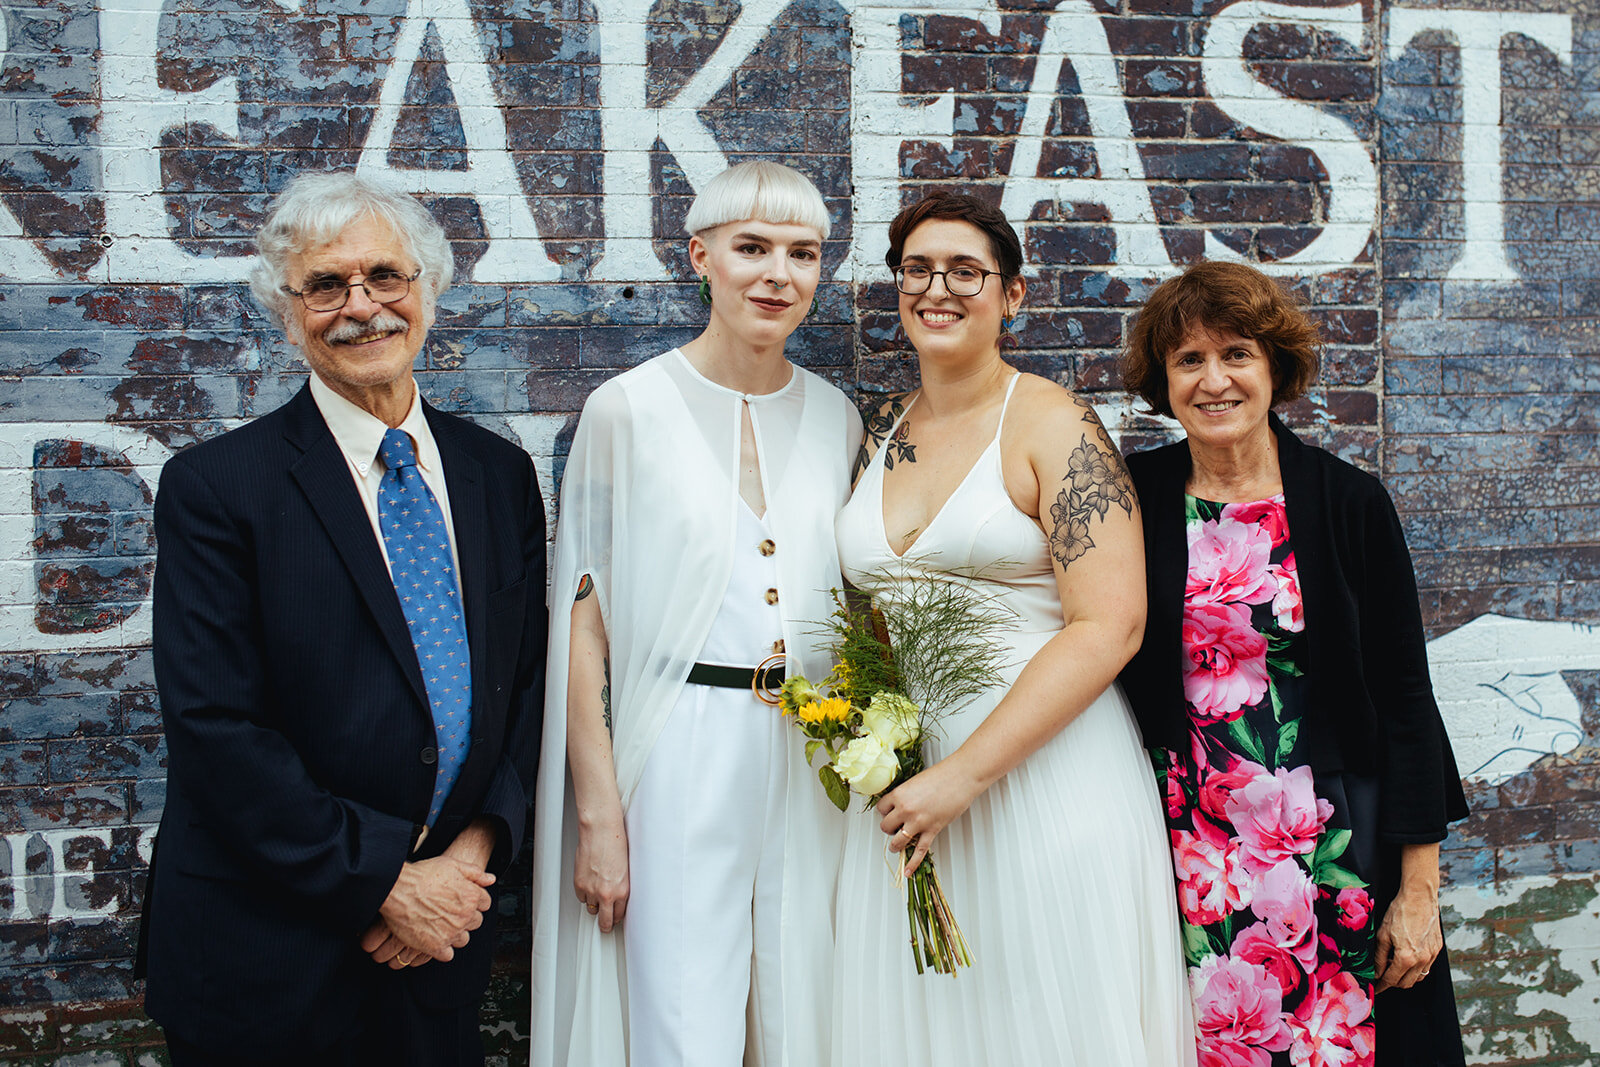 Newly married LGBTQ couple posing with family in Philadelphia Shawnee Custalow Queer Wedding photography